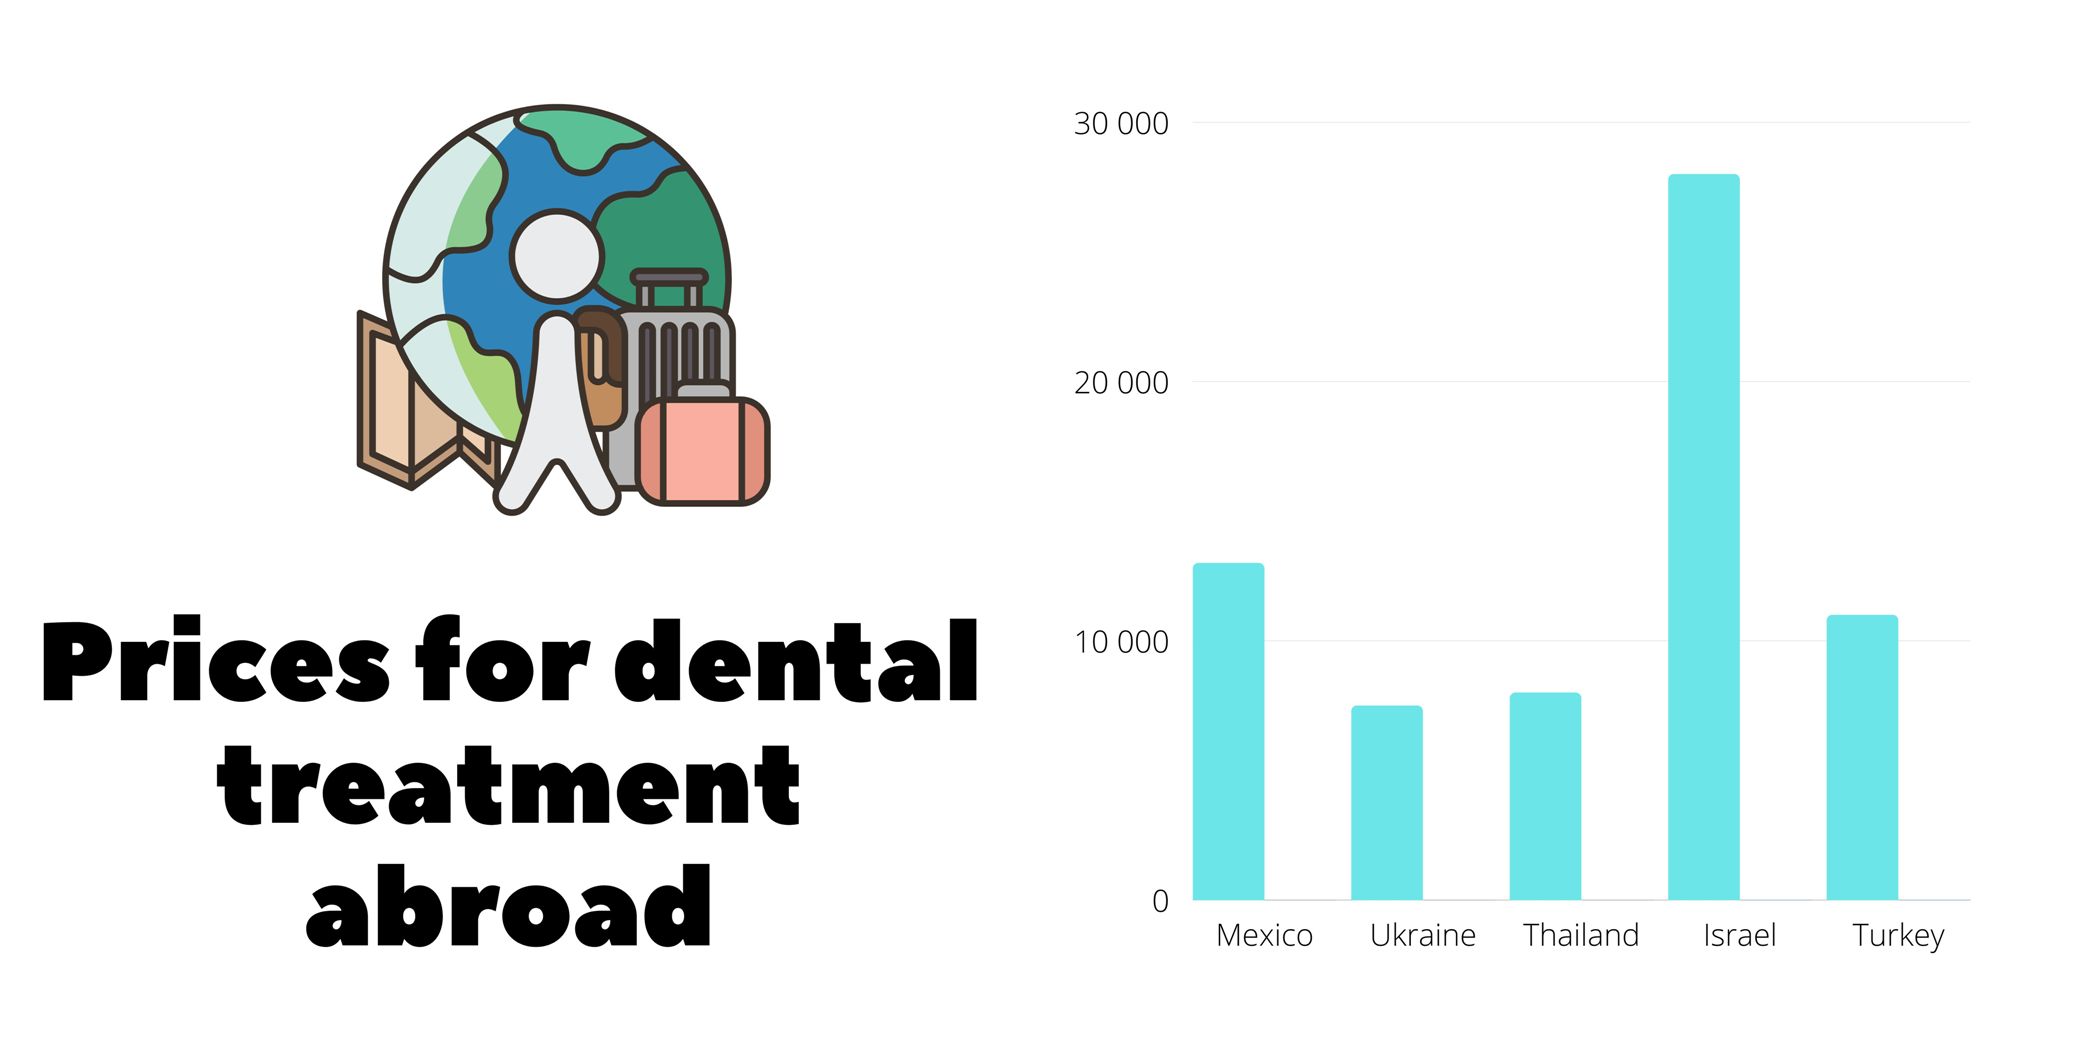 Prices for dental treatment abroad